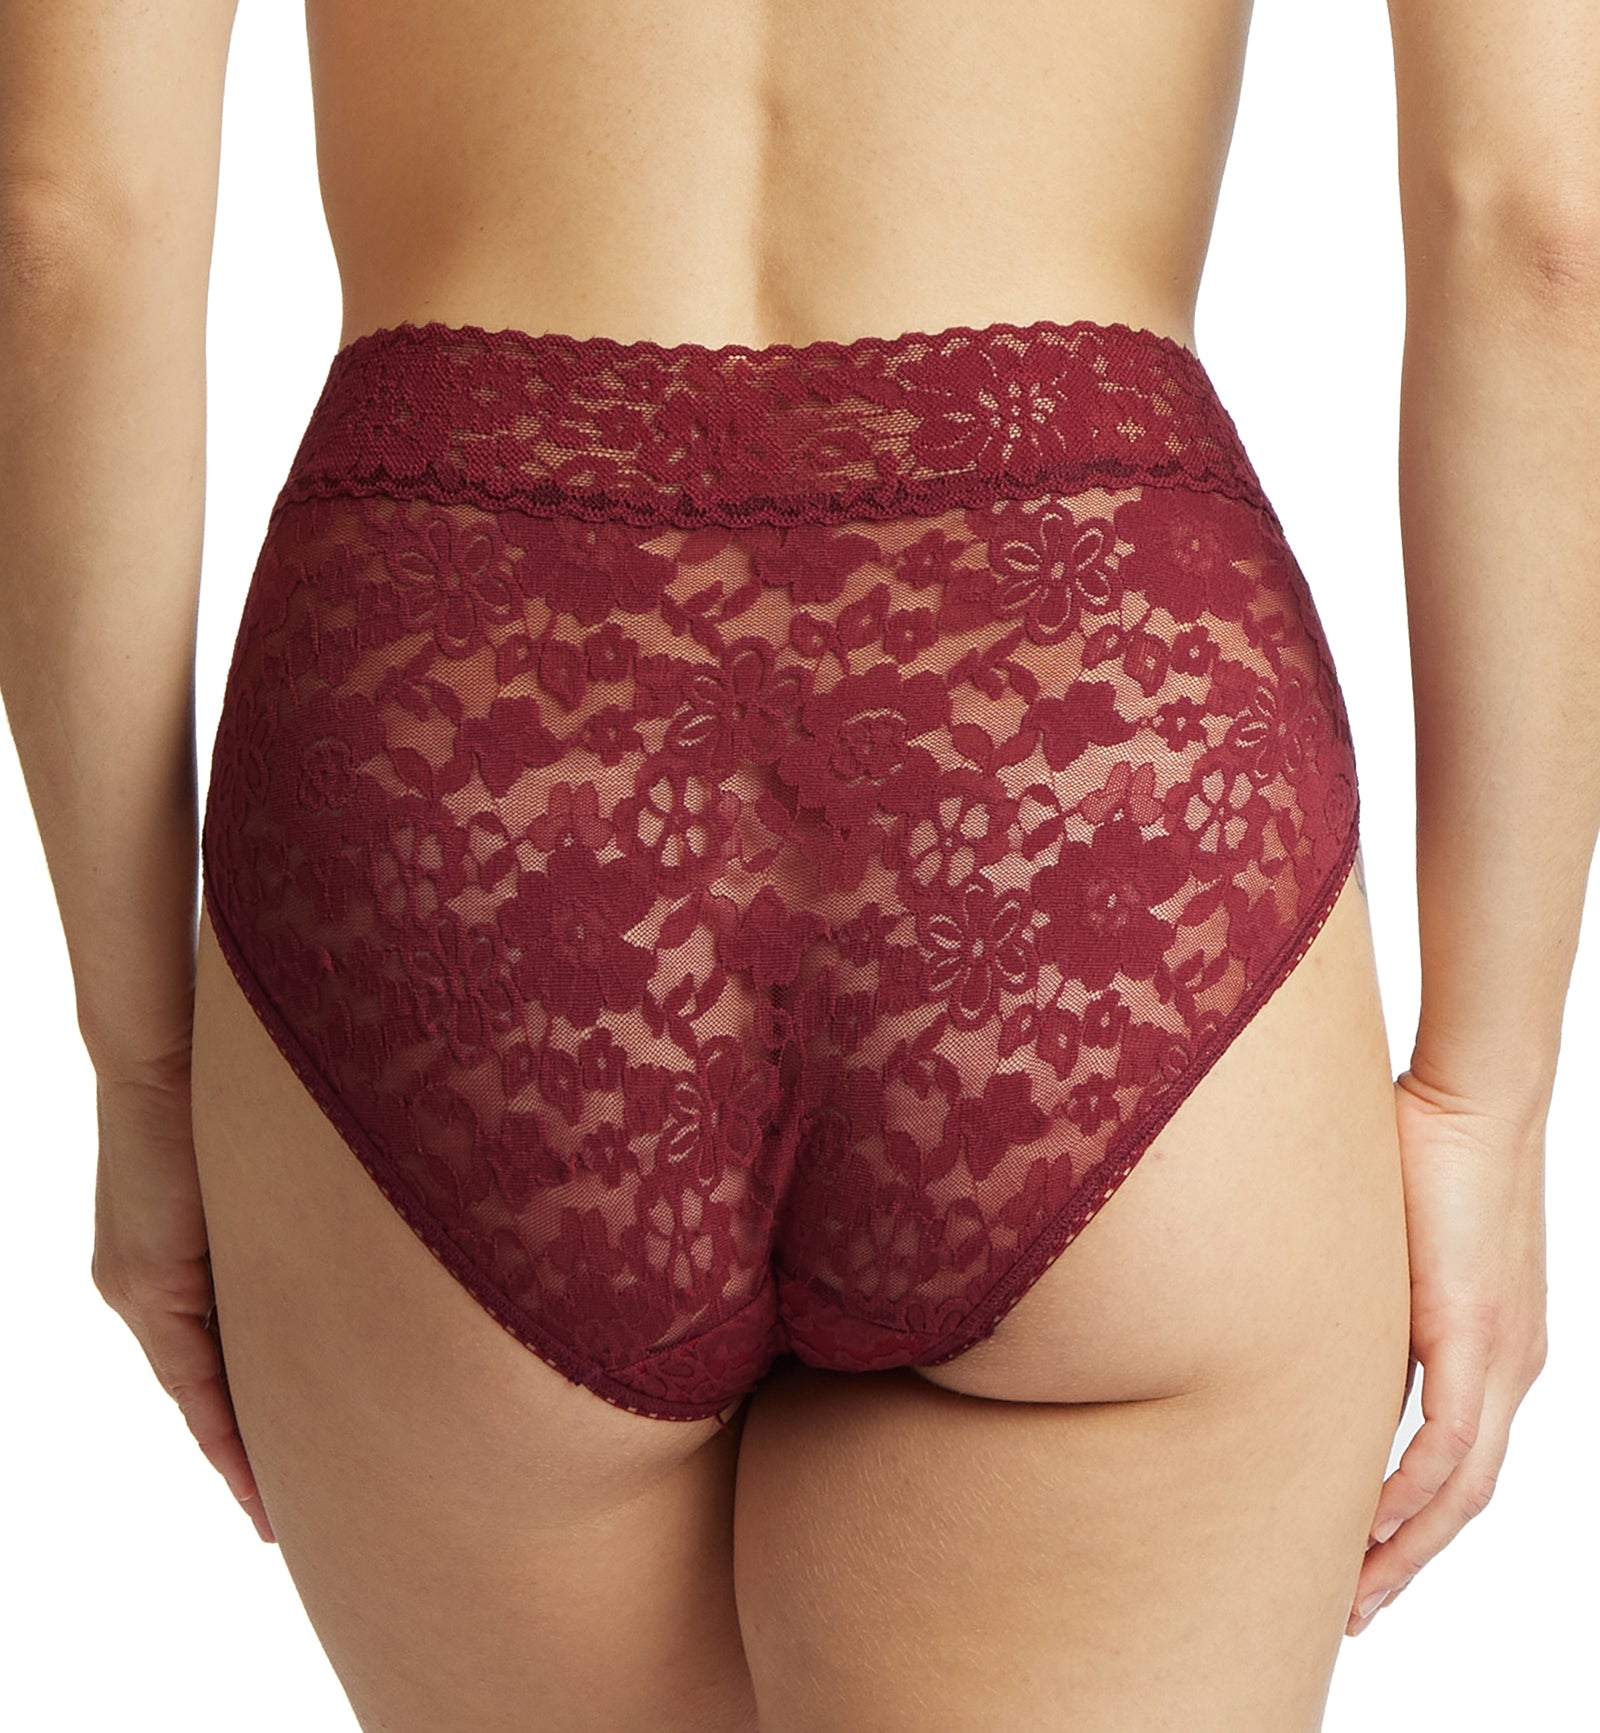 Hanky Panky Daily Lace French Brief (772461P),Small,Lipstick Red - Lipstick Red,Small